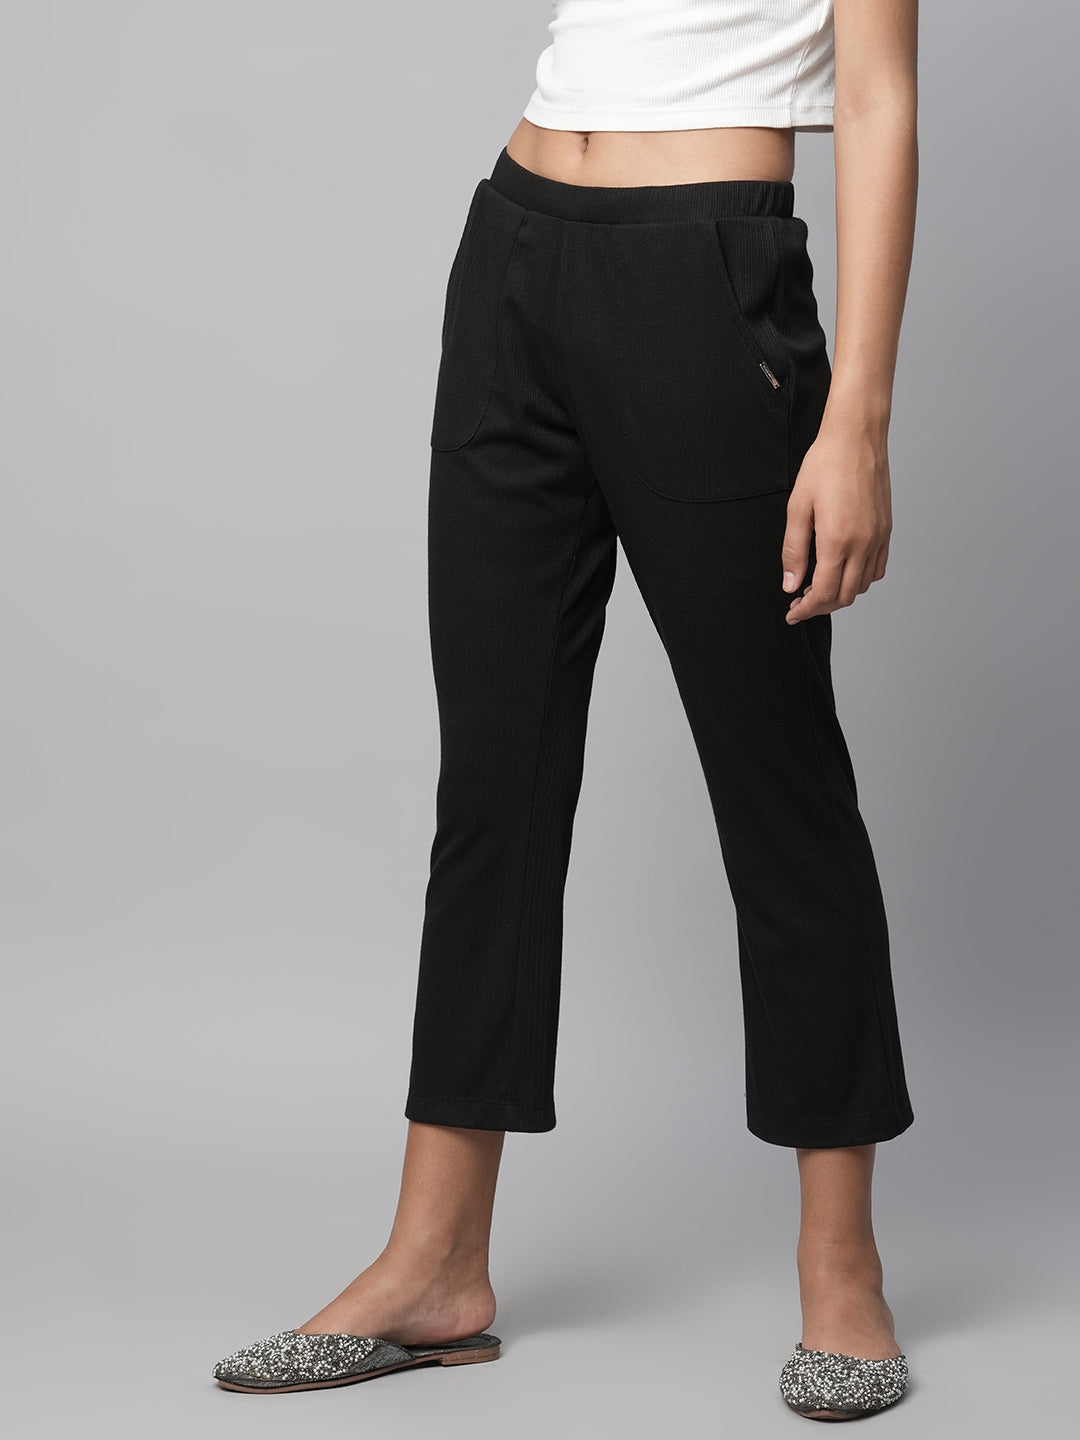 Ribbed Knit Pull On Slim Leg Cropped Lounge Pants